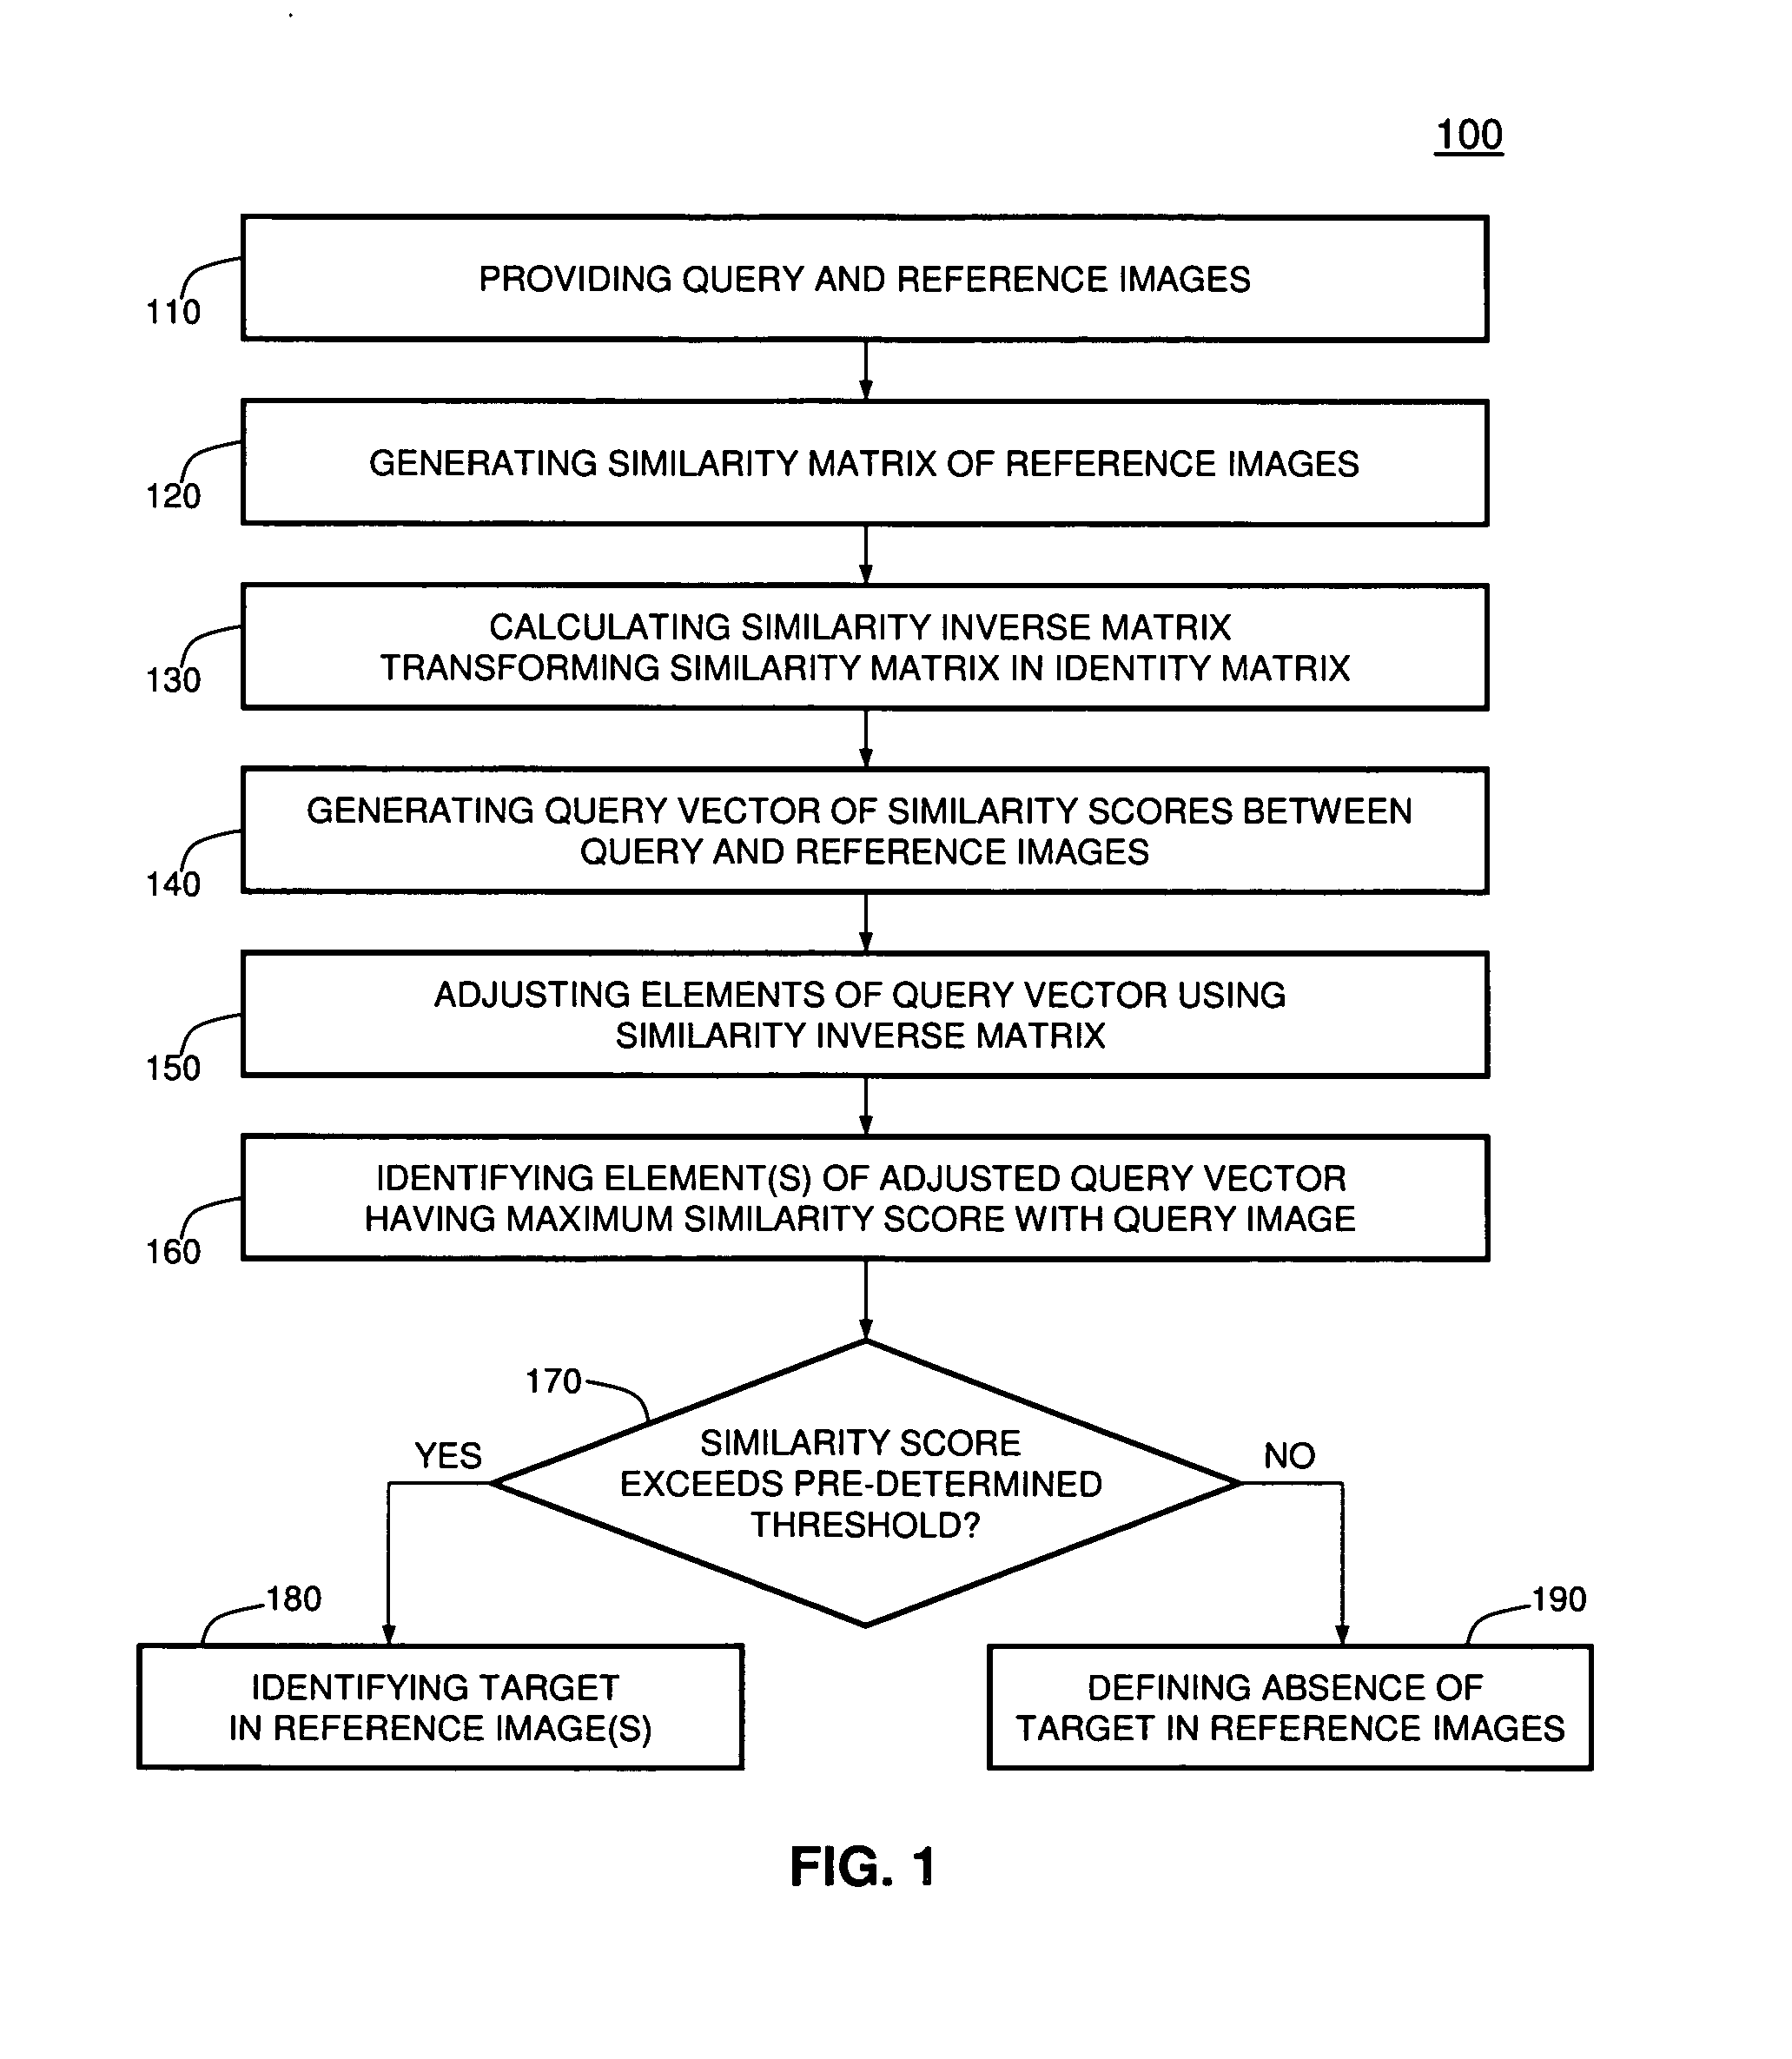 Method and System for Image Recognition Using a Similarity Inverse Matrix